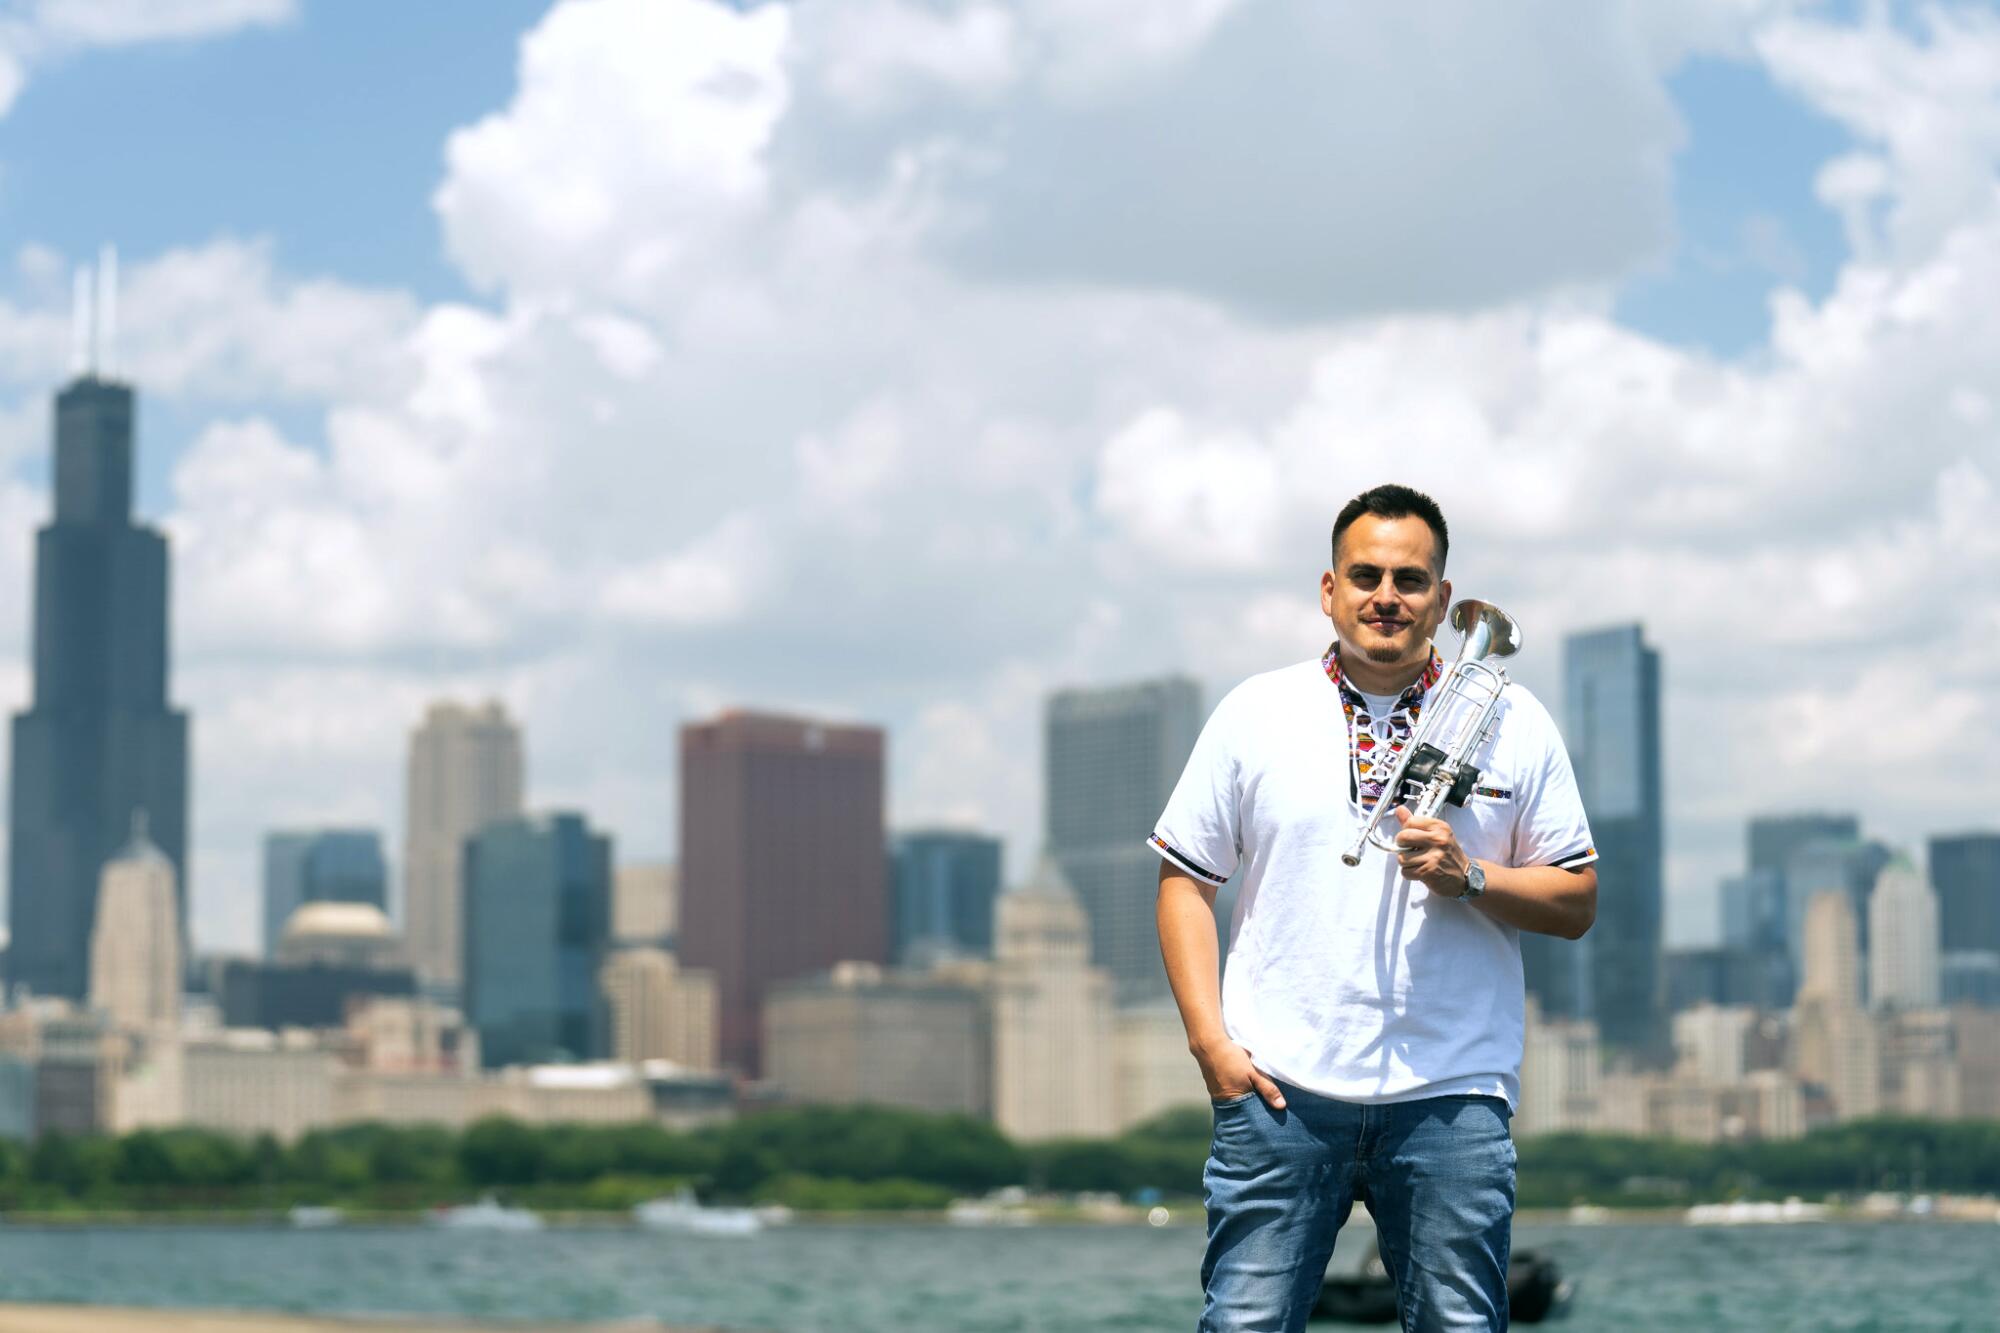 Trumpet player Daniel Flores poses with the Chicago skyline behind him